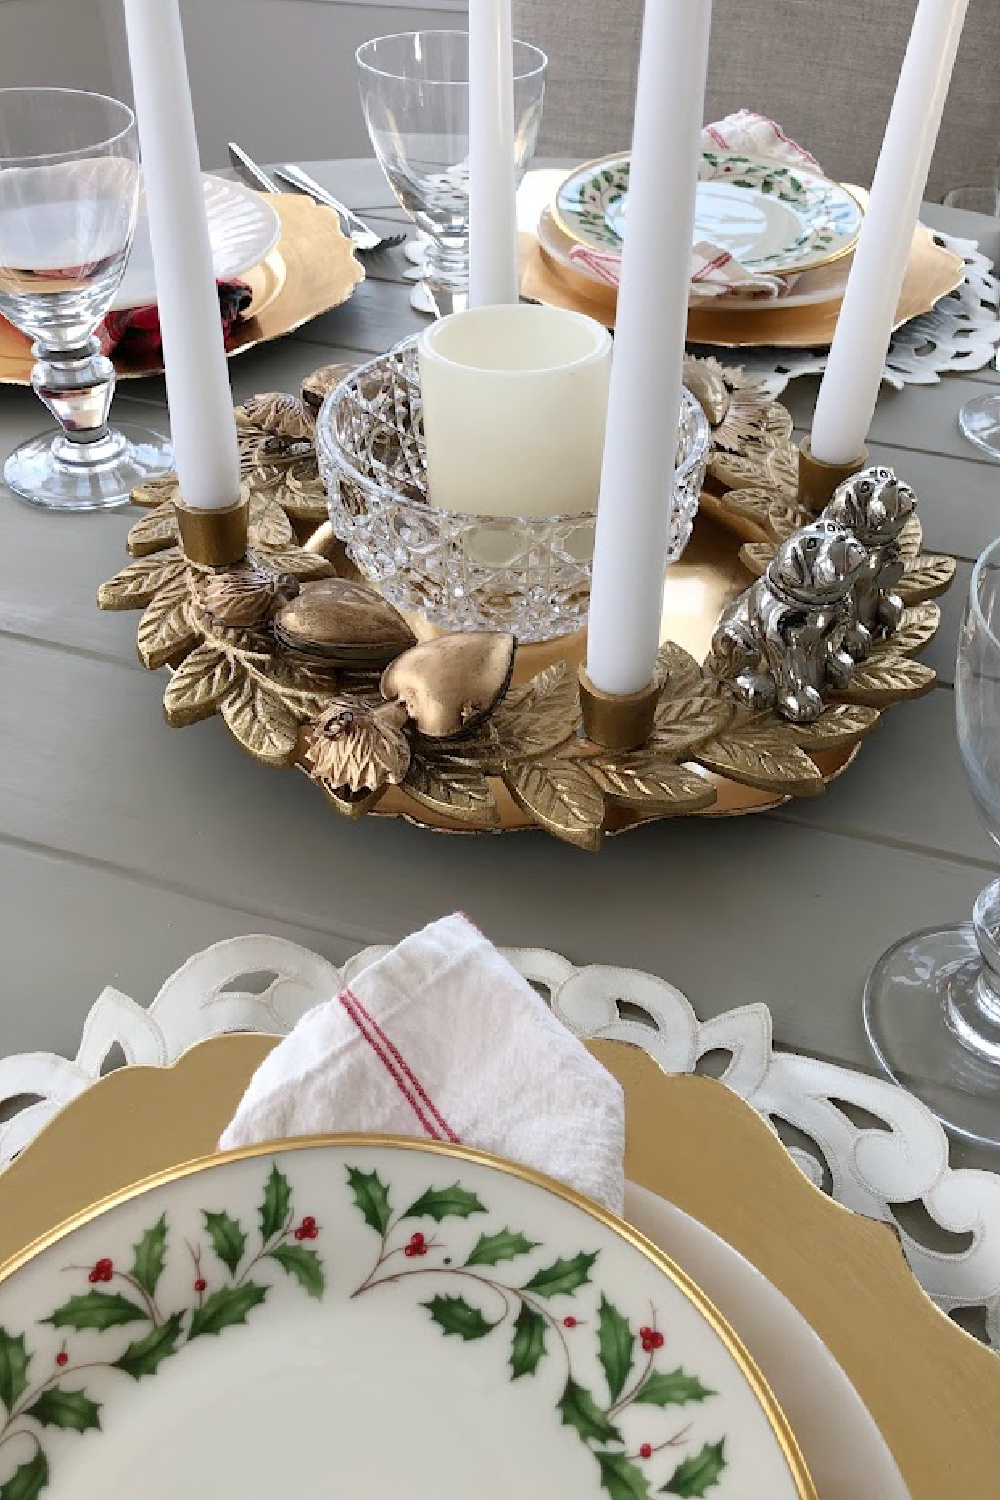 Gold advent wreath with candles on our kitchen table - Hello Lovely Studio. #adventwreath #adventcandles